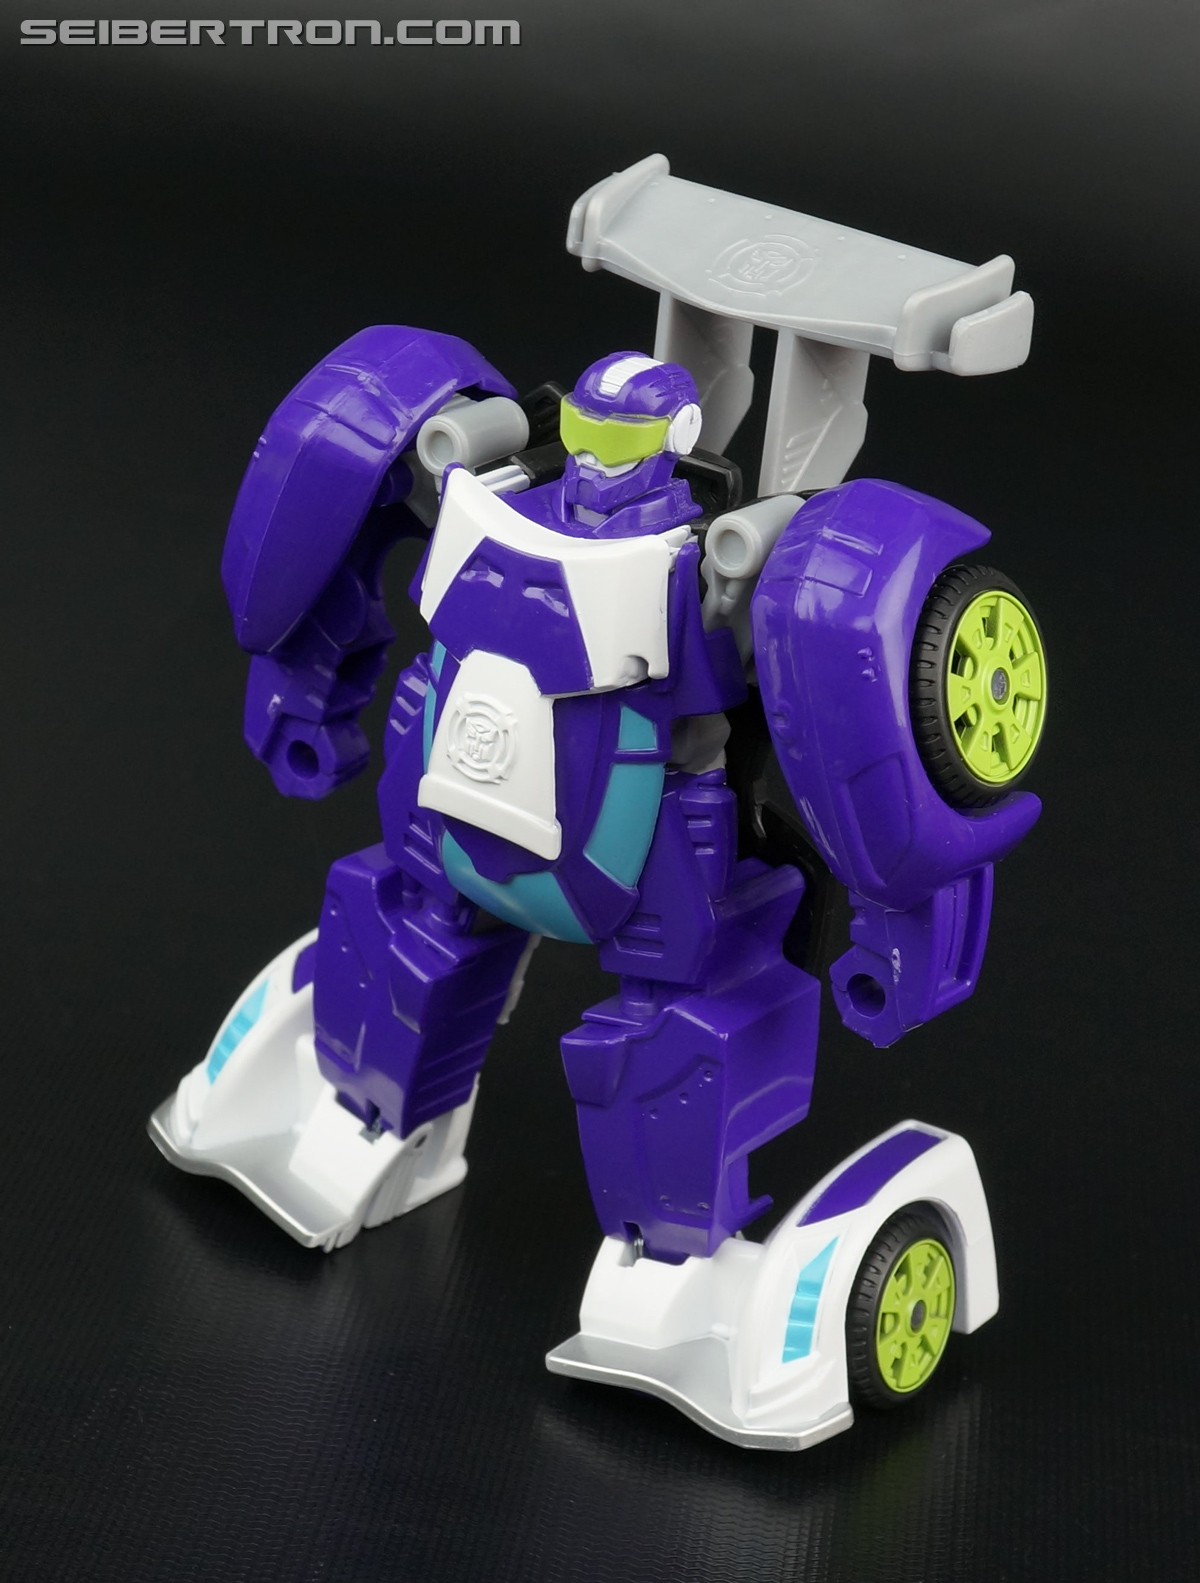 Transformers Rescue Bots Blurr (Image #37 of 63)